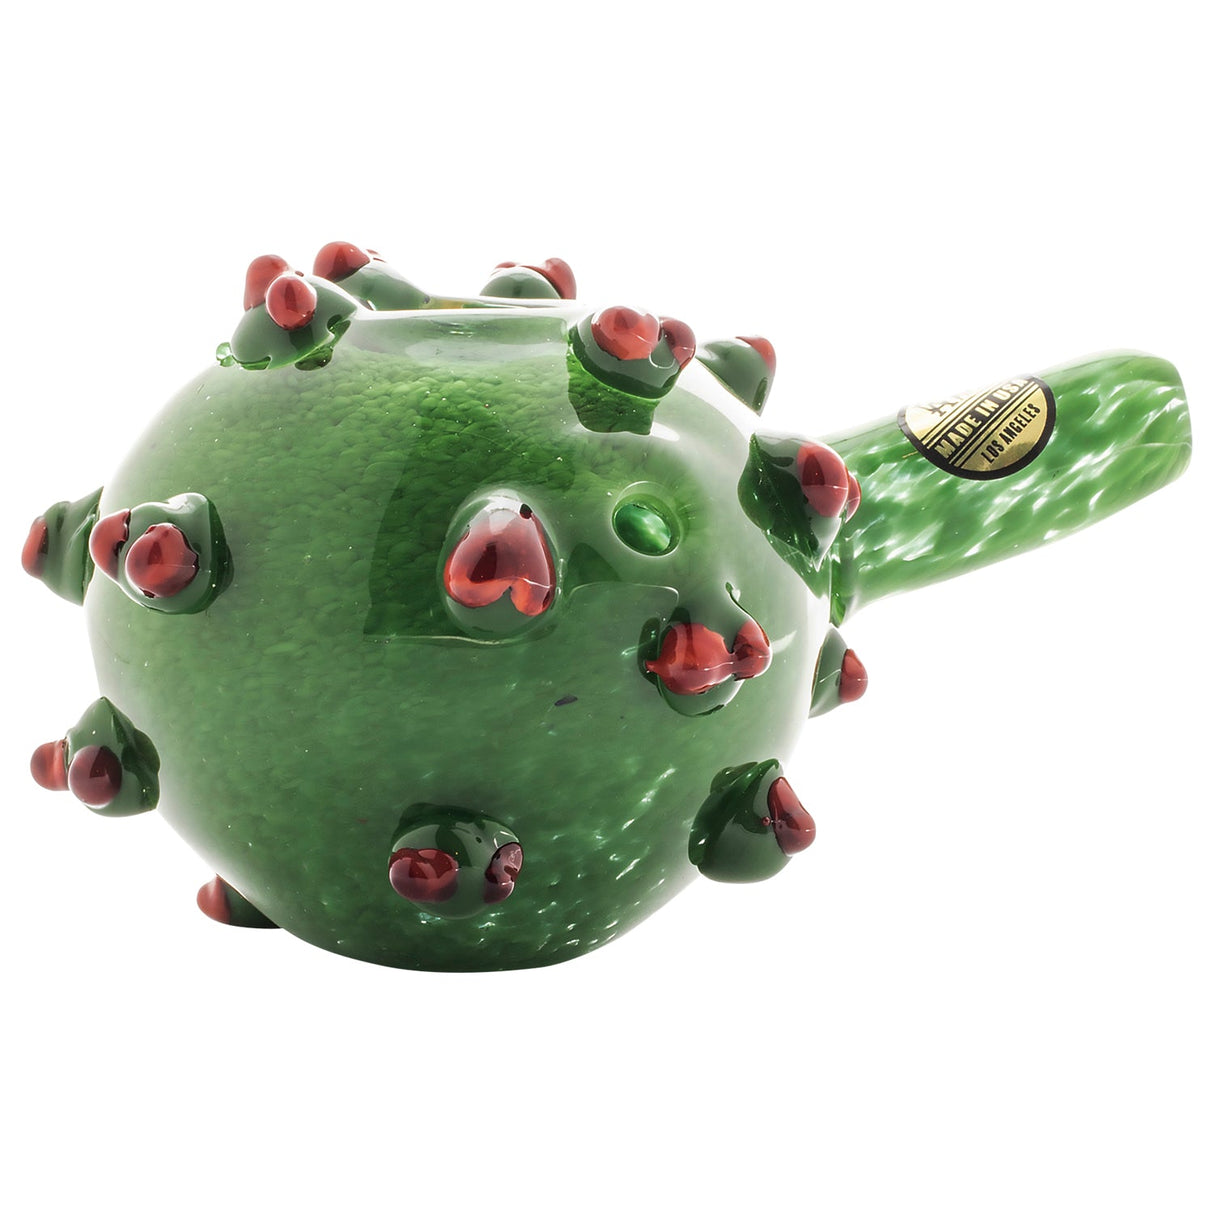 LA Pipes "Corona Rona" Hand Pipe in green with red accents, spoon design, side view